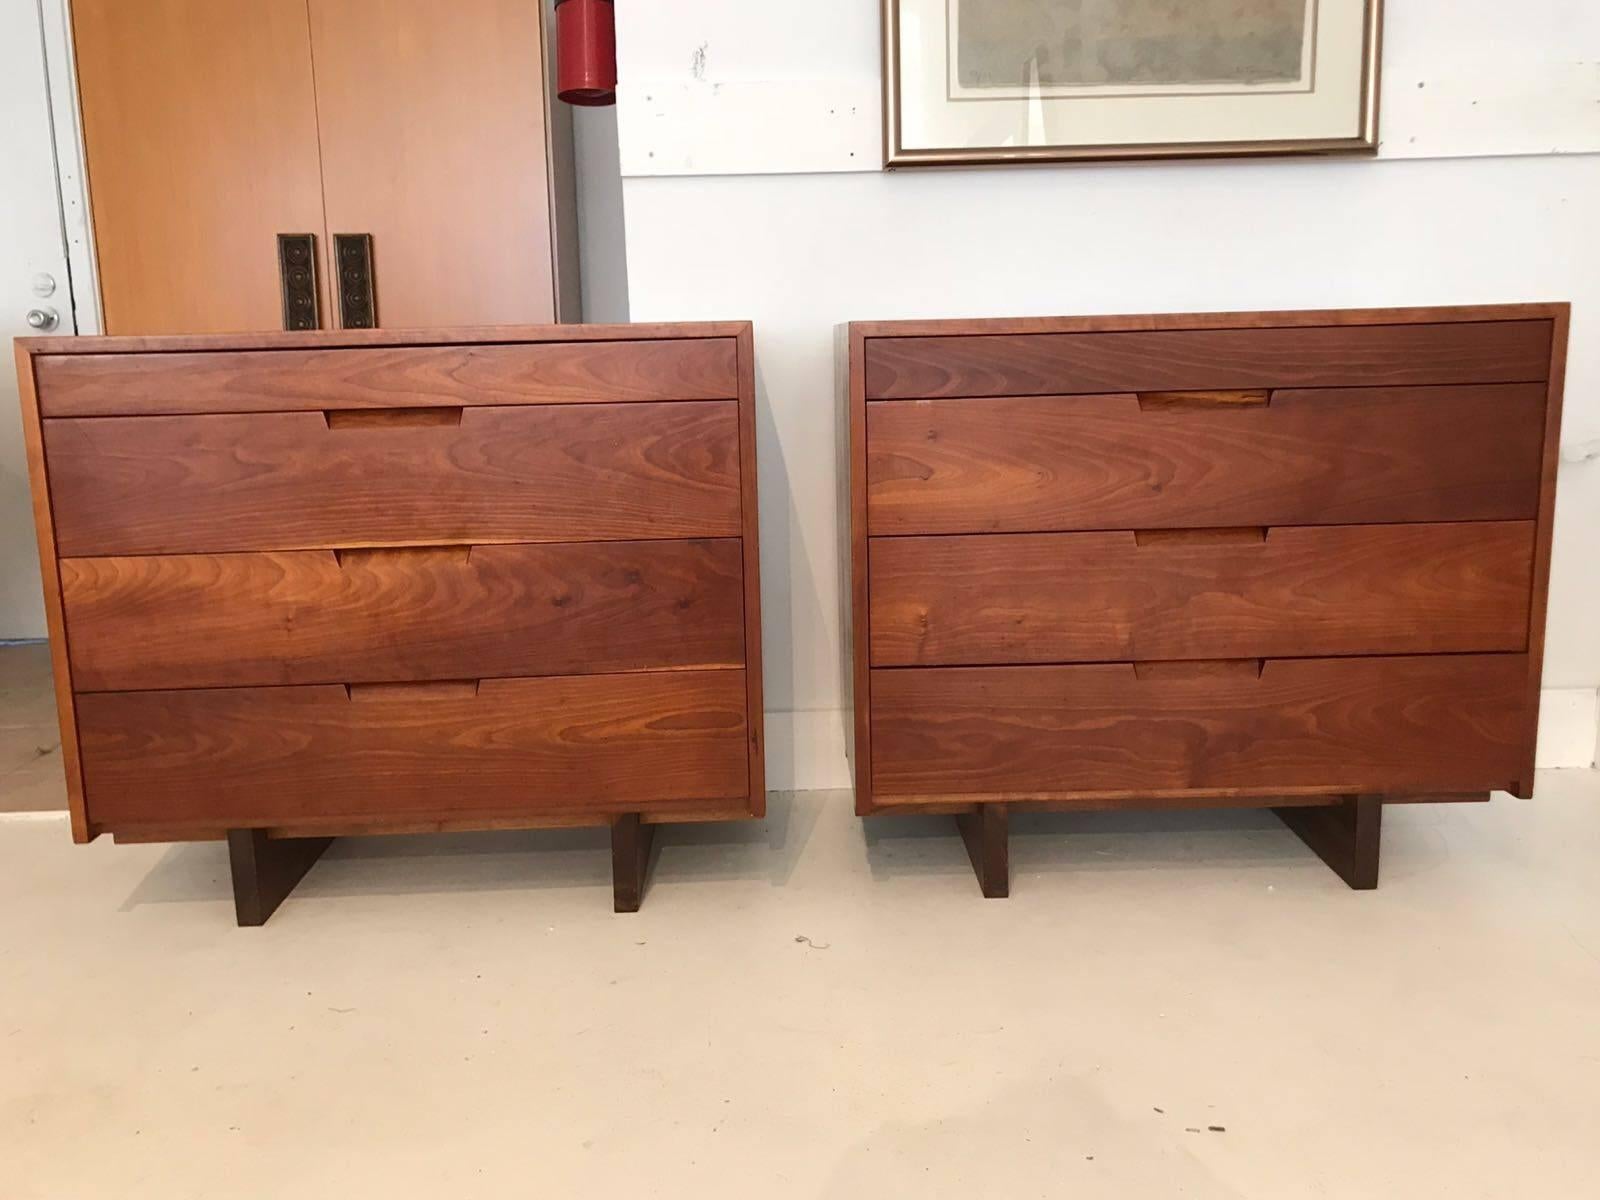 An excellent pair of four-drawer dressers custom-made by George Nakashima in his New Hope Studio in 1970. Constructed in highly figured cherry in a Minimalist rectangular forms with exposed dovetail joints on sap block base, these pieces exemplify